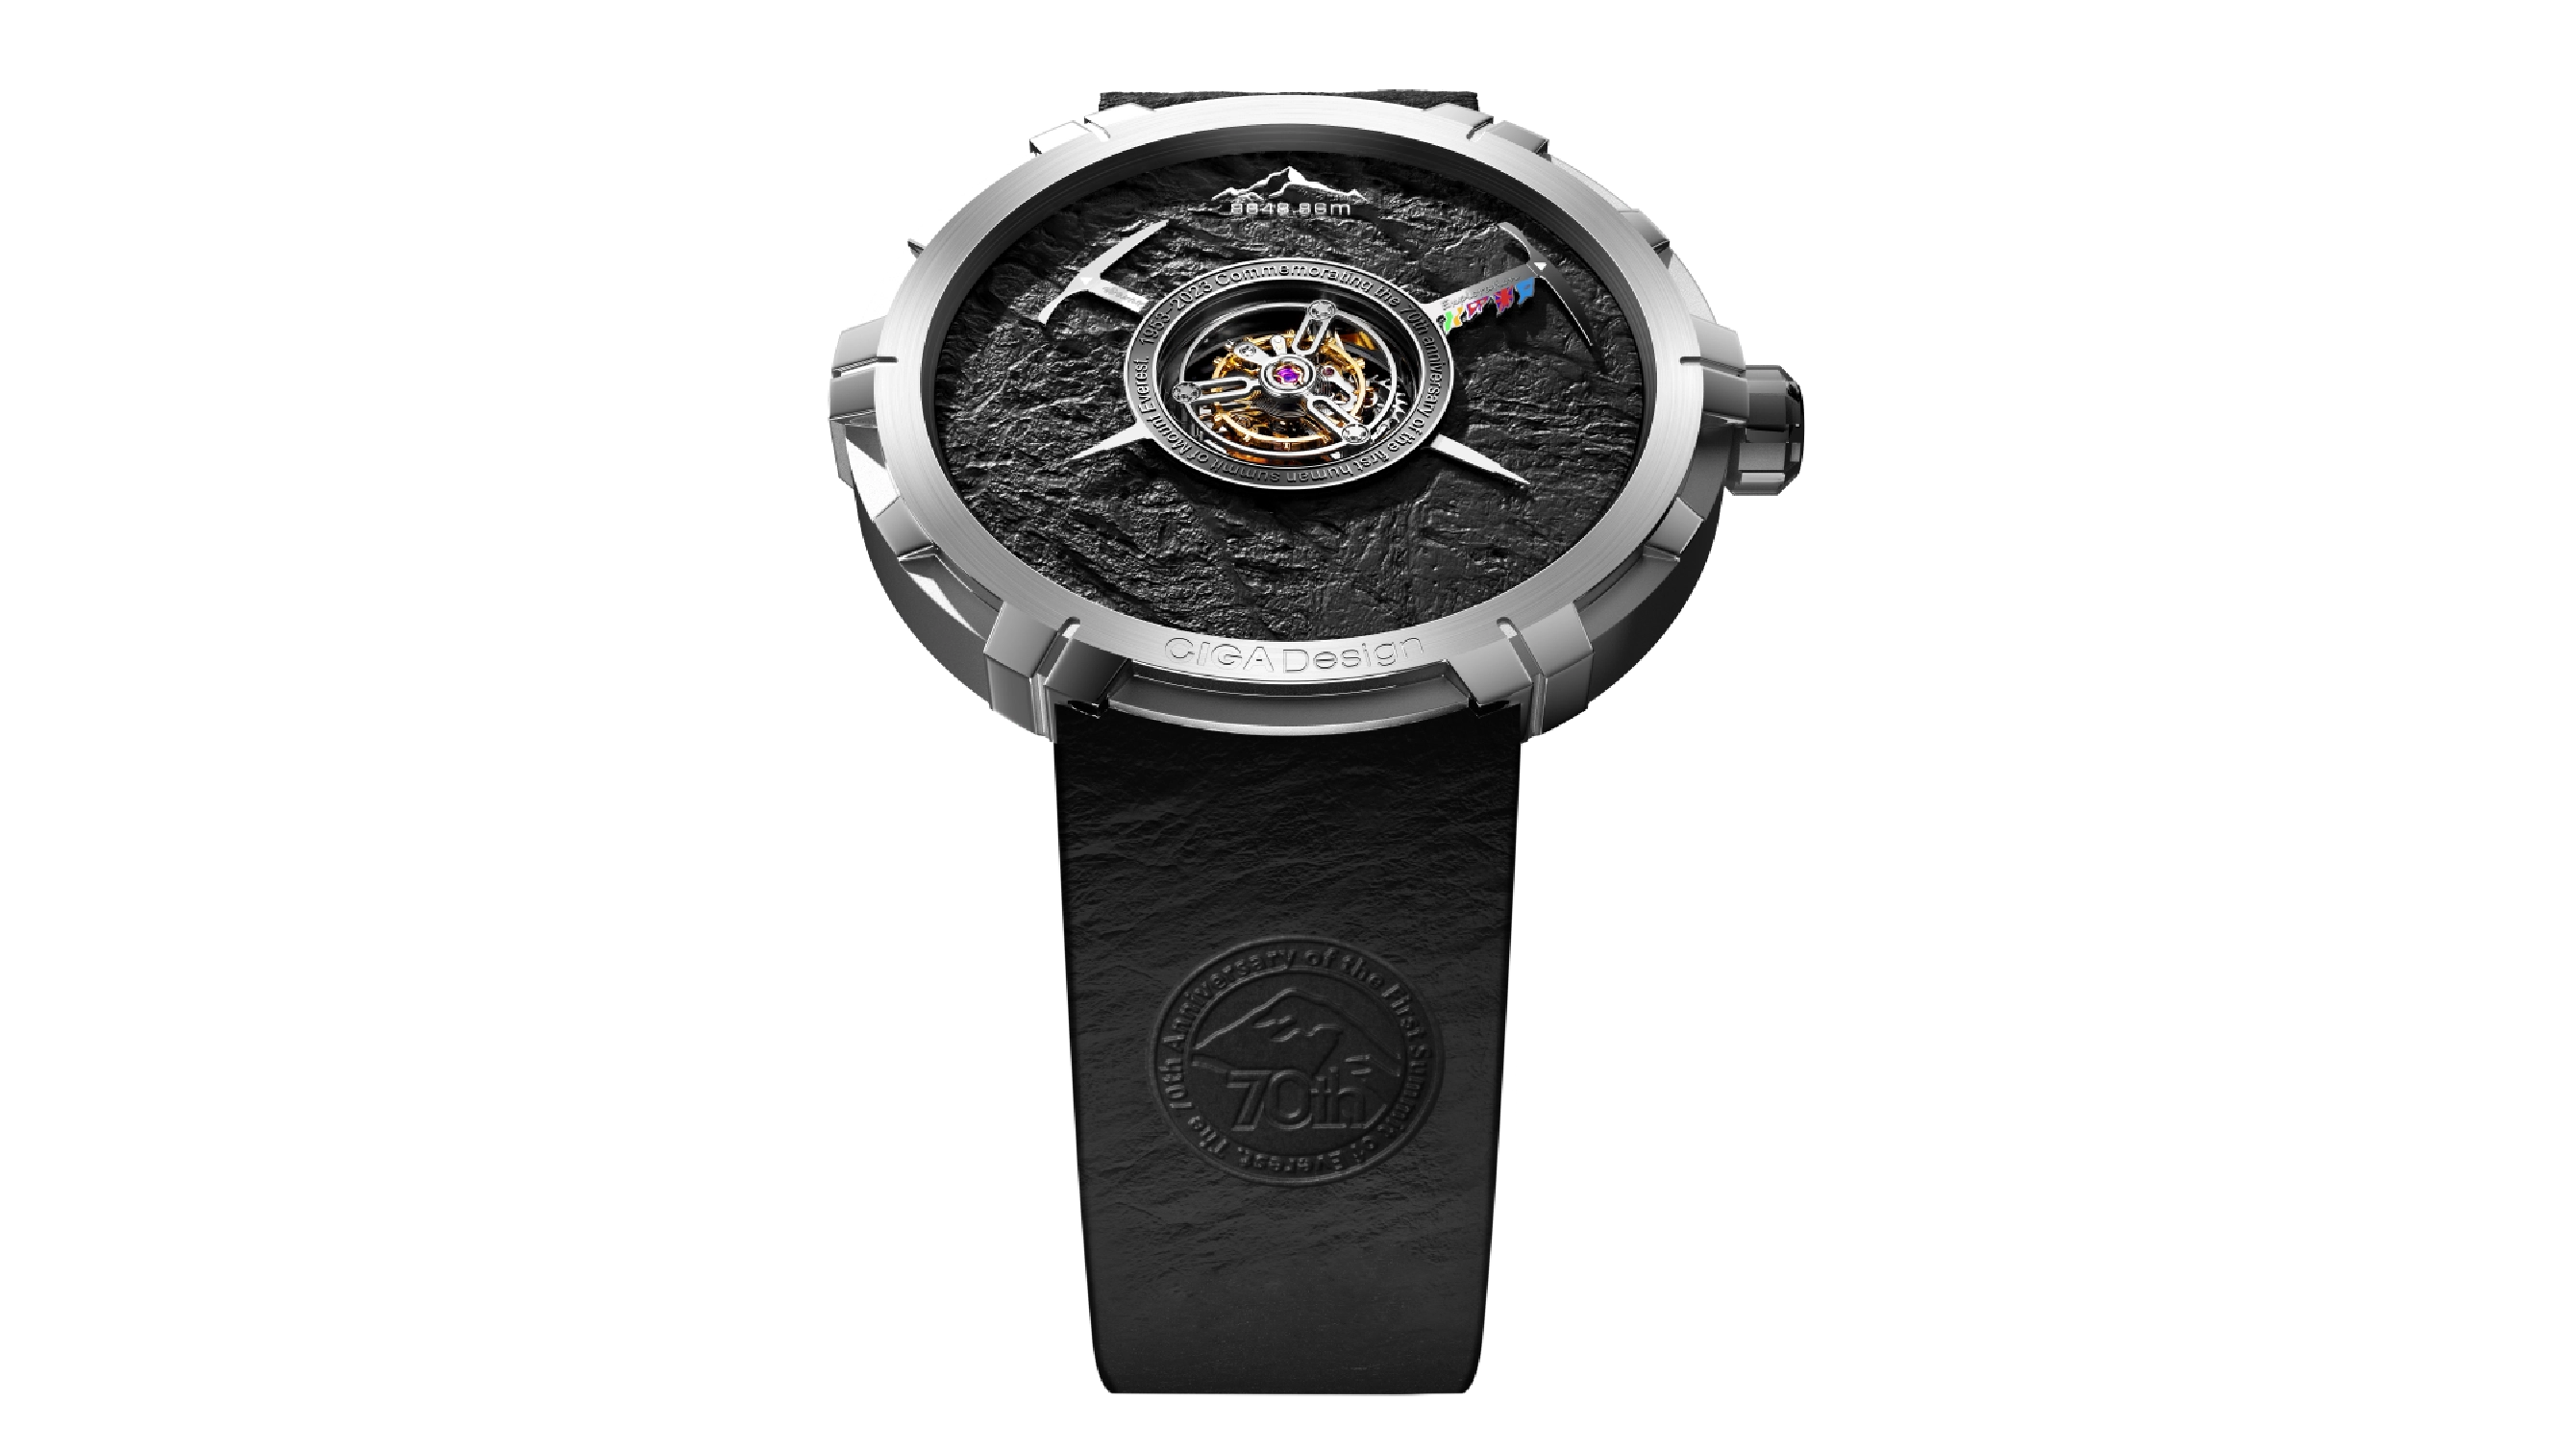 CIGA Design’s Central Tourbillon Mount Everest Homage Edition represents another peak for Chinese watchmaking